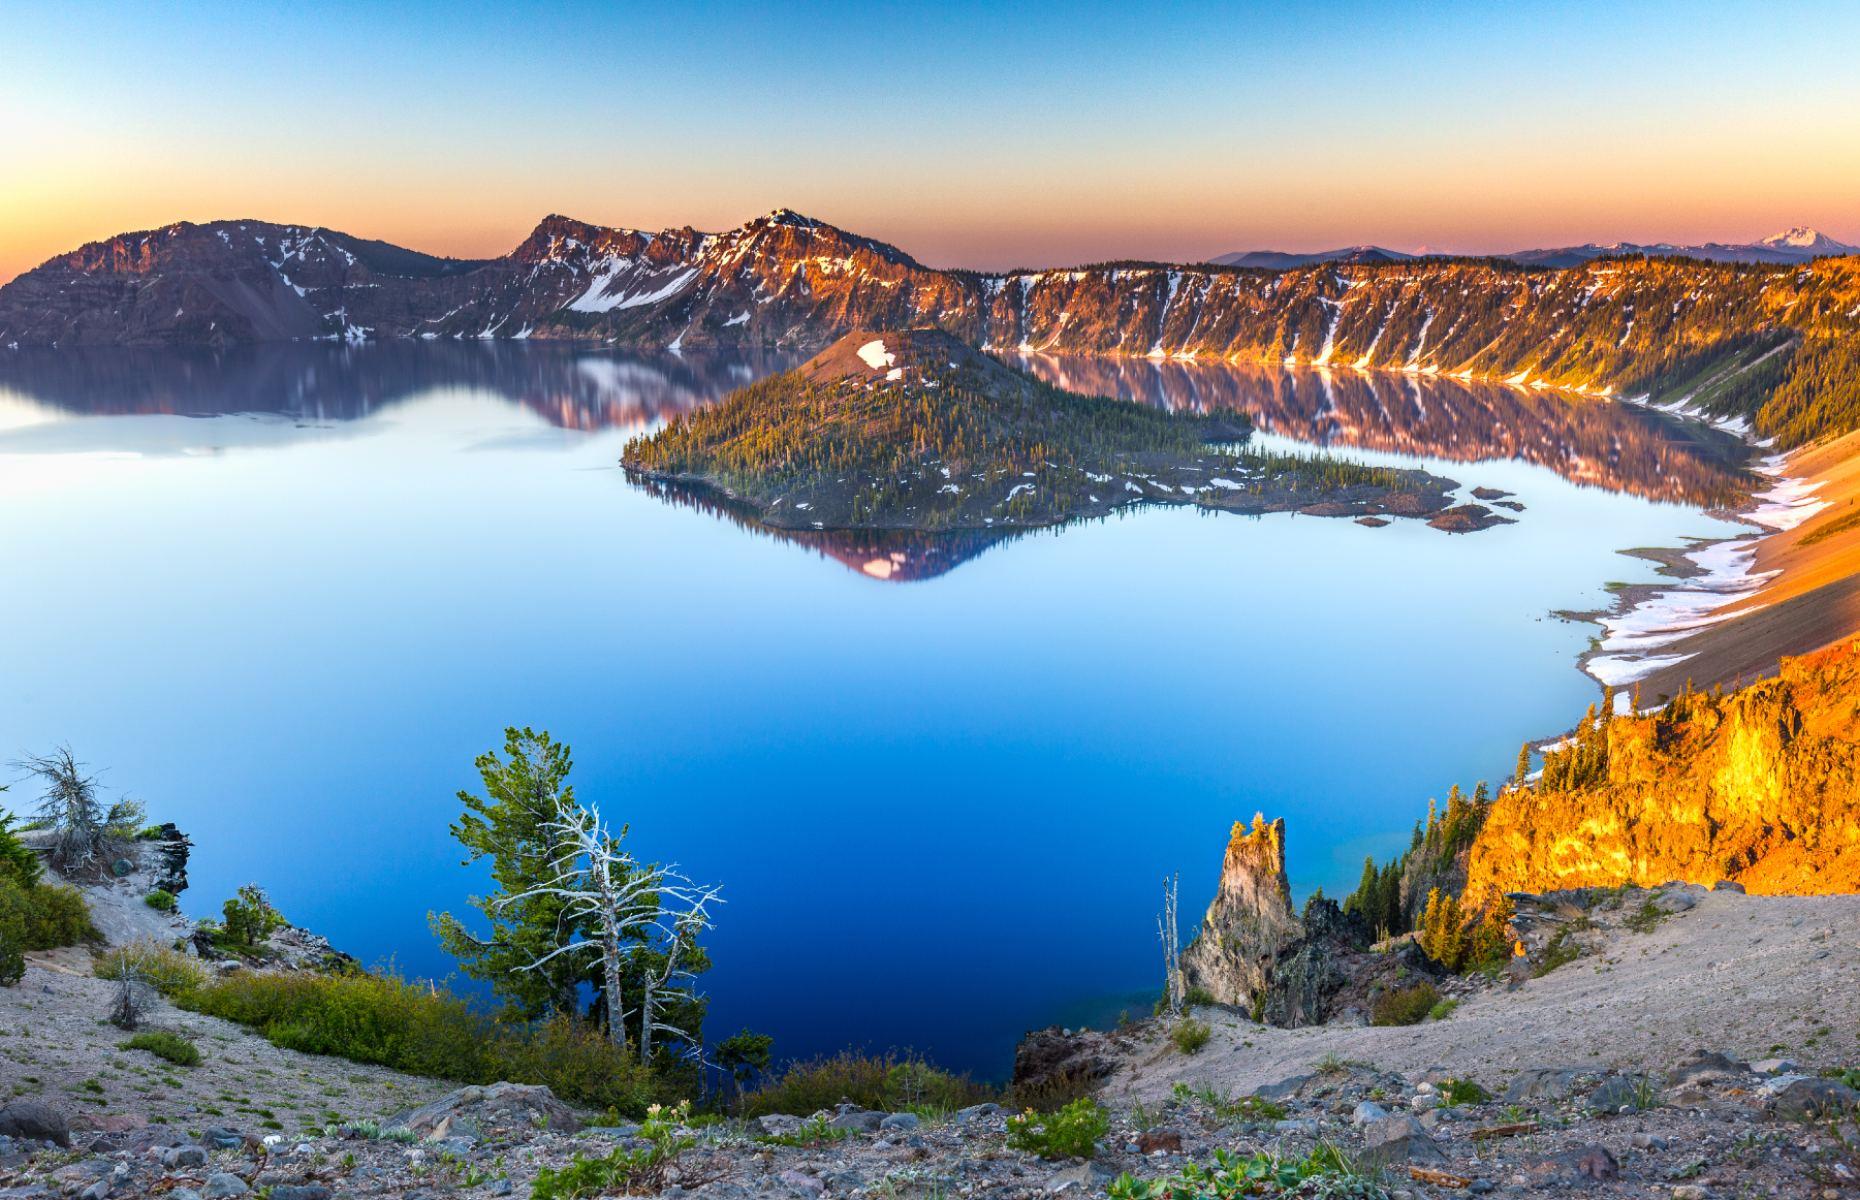 <p>True to the name, there’s plenty of dramatic scenery to be found along <a href="https://nwtravelmag.com/road-trip-along-the-volcanic-legacy-scenic-byway/">this volcano-to-volcano road trip</a>. Starting at Crater Lake National Park in Oregon, you’ll journey 500 miles (805km) south into northern California, encountering geothermal geysers, waterfalls and (of course) volcanoes along the way. Be sure to drive the 33-mile (53km) rim road around the edge of Crater Lake (pictured), the caldera of Mount Mazama. With piercing blue waters, it's mesmerizingly beautiful and is also the country’s deepest lake.</p>